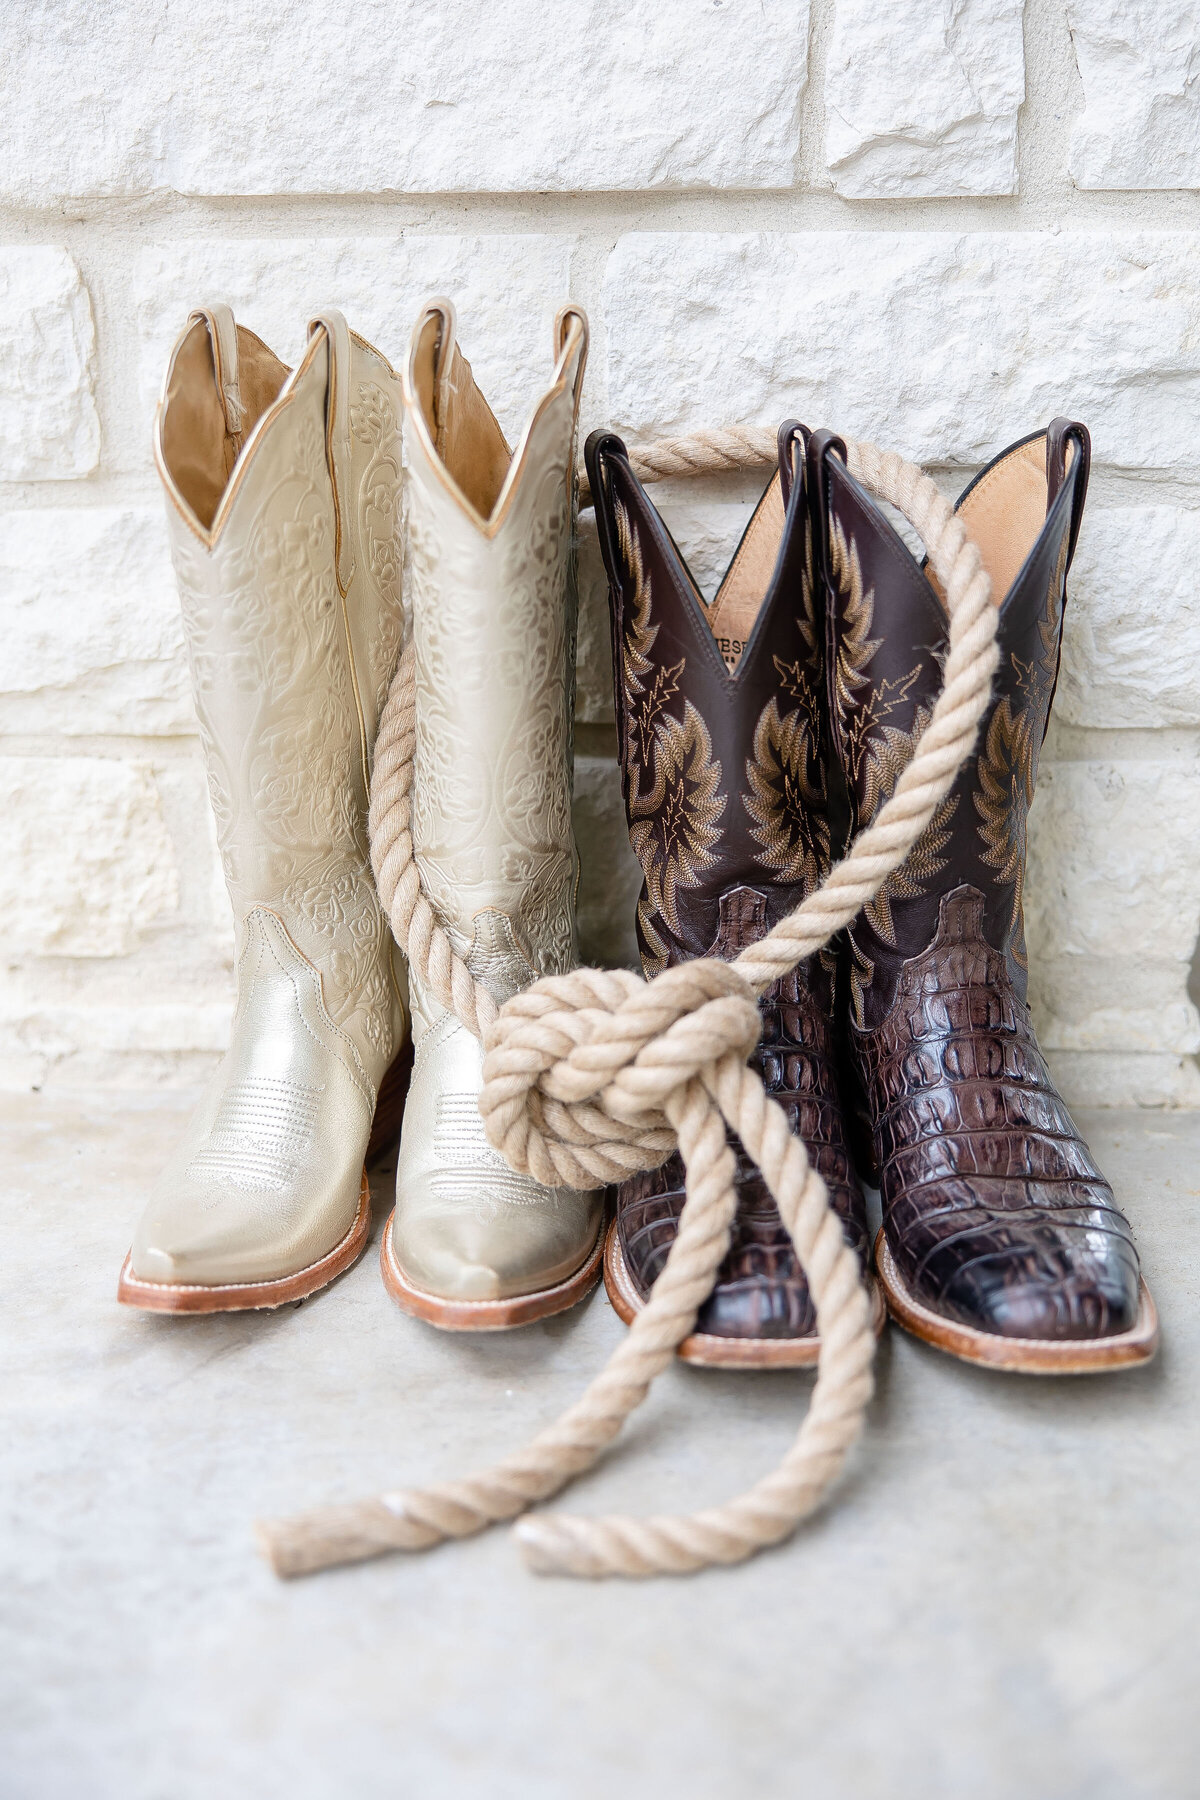 bride and groom boots with rope tied detail by wedding photographer in Texas